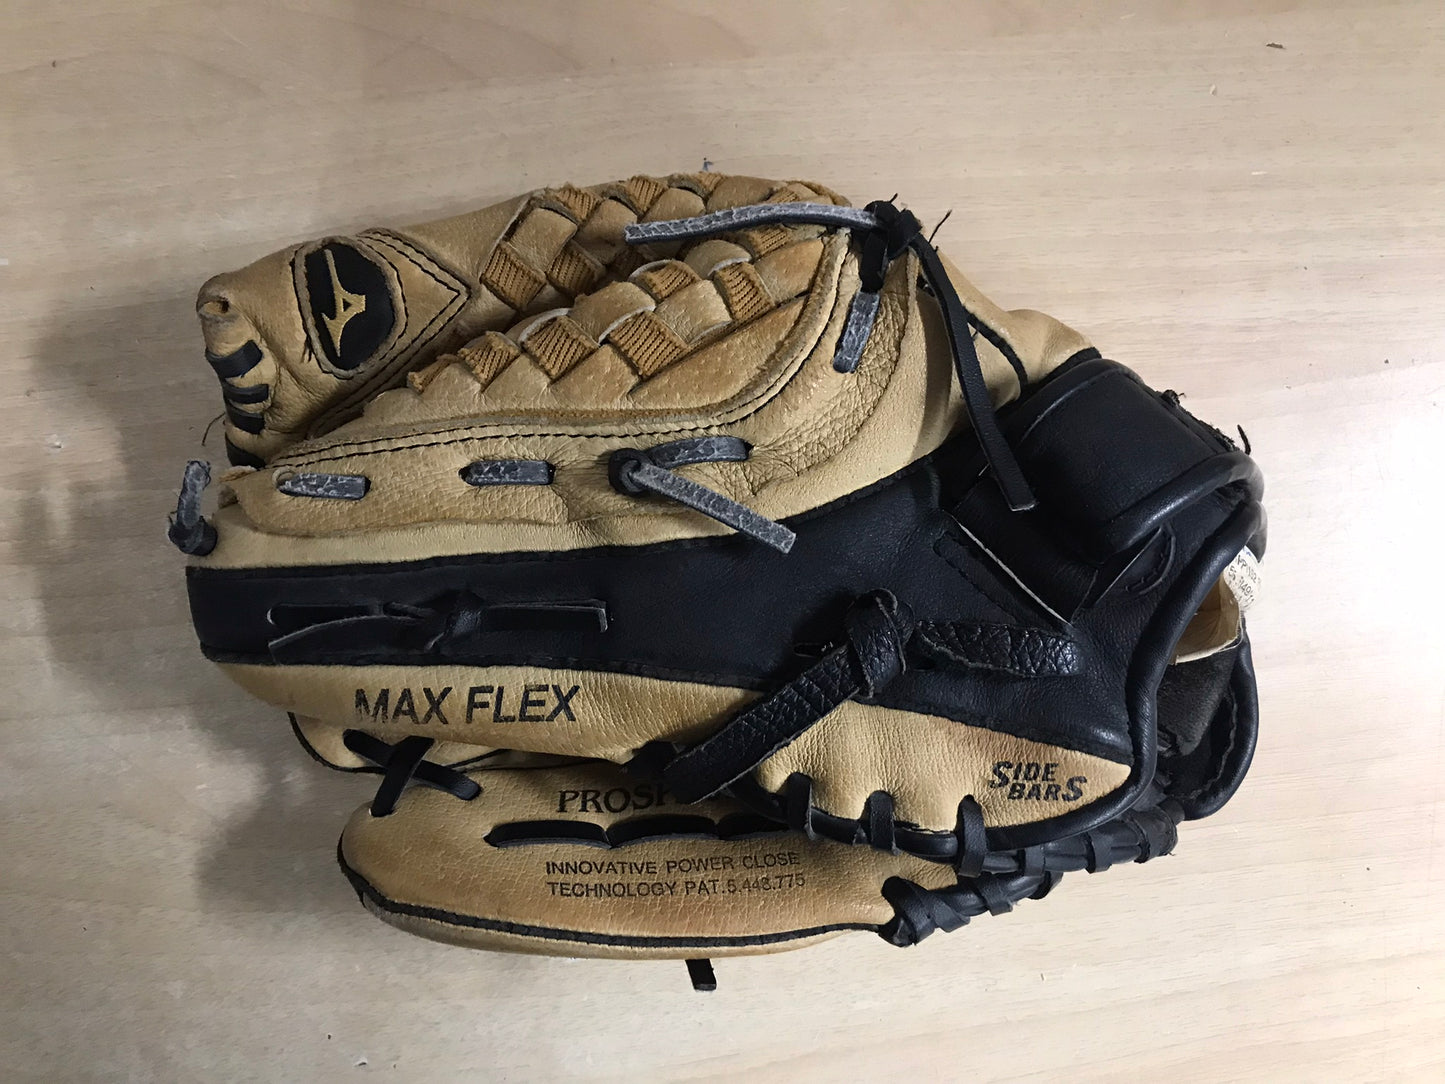 Baseball Glove Adult Size 11.5 inch Mizuno Tan Black Leather Fits on RIGHT Hand